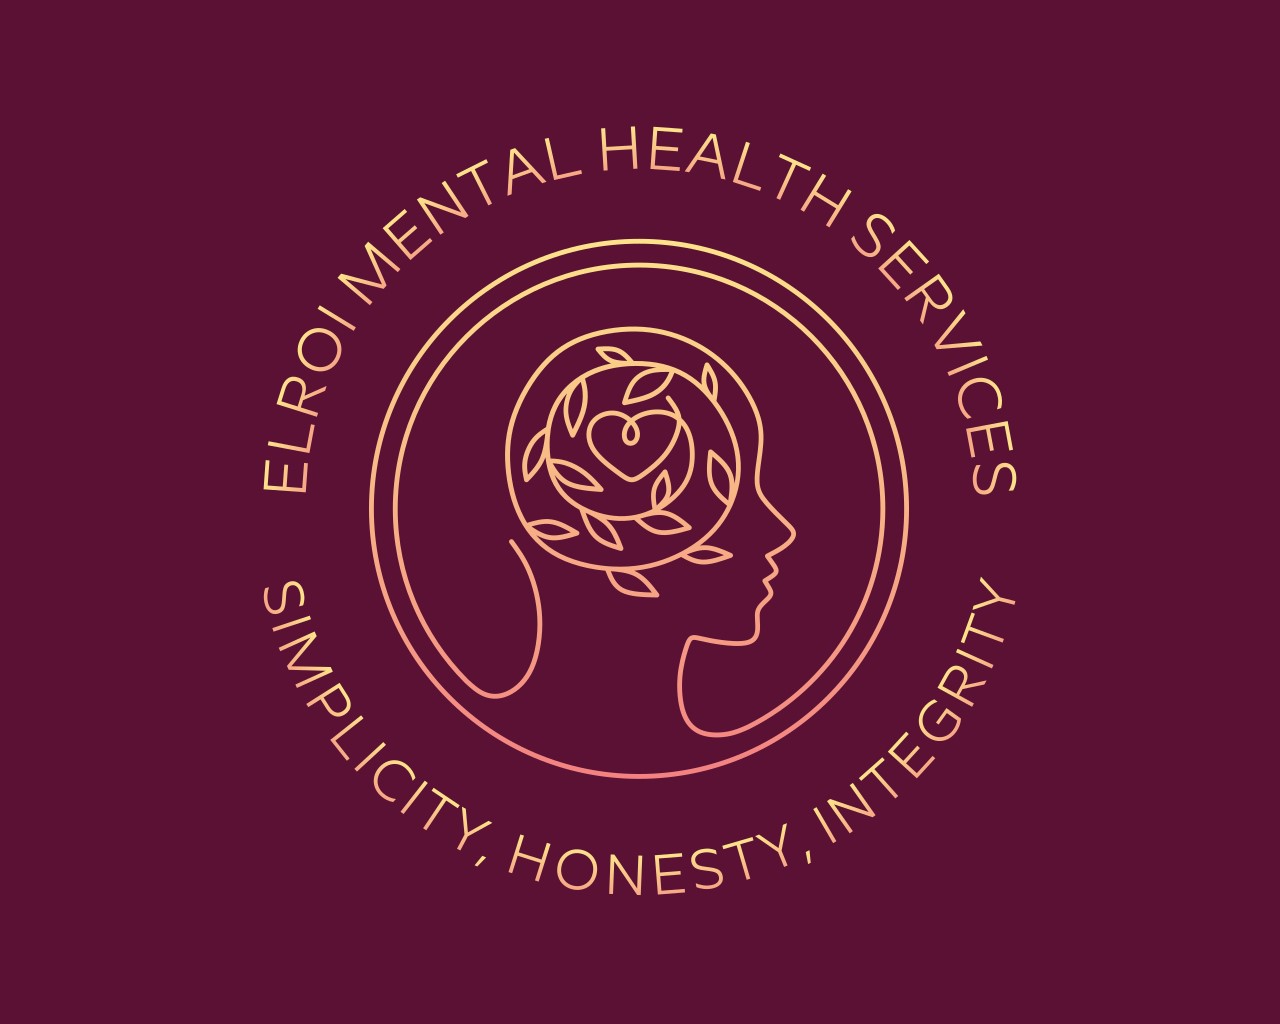 Elroi Mental Health Services Provides Culturally Competent And Compassionate Mental Health Care